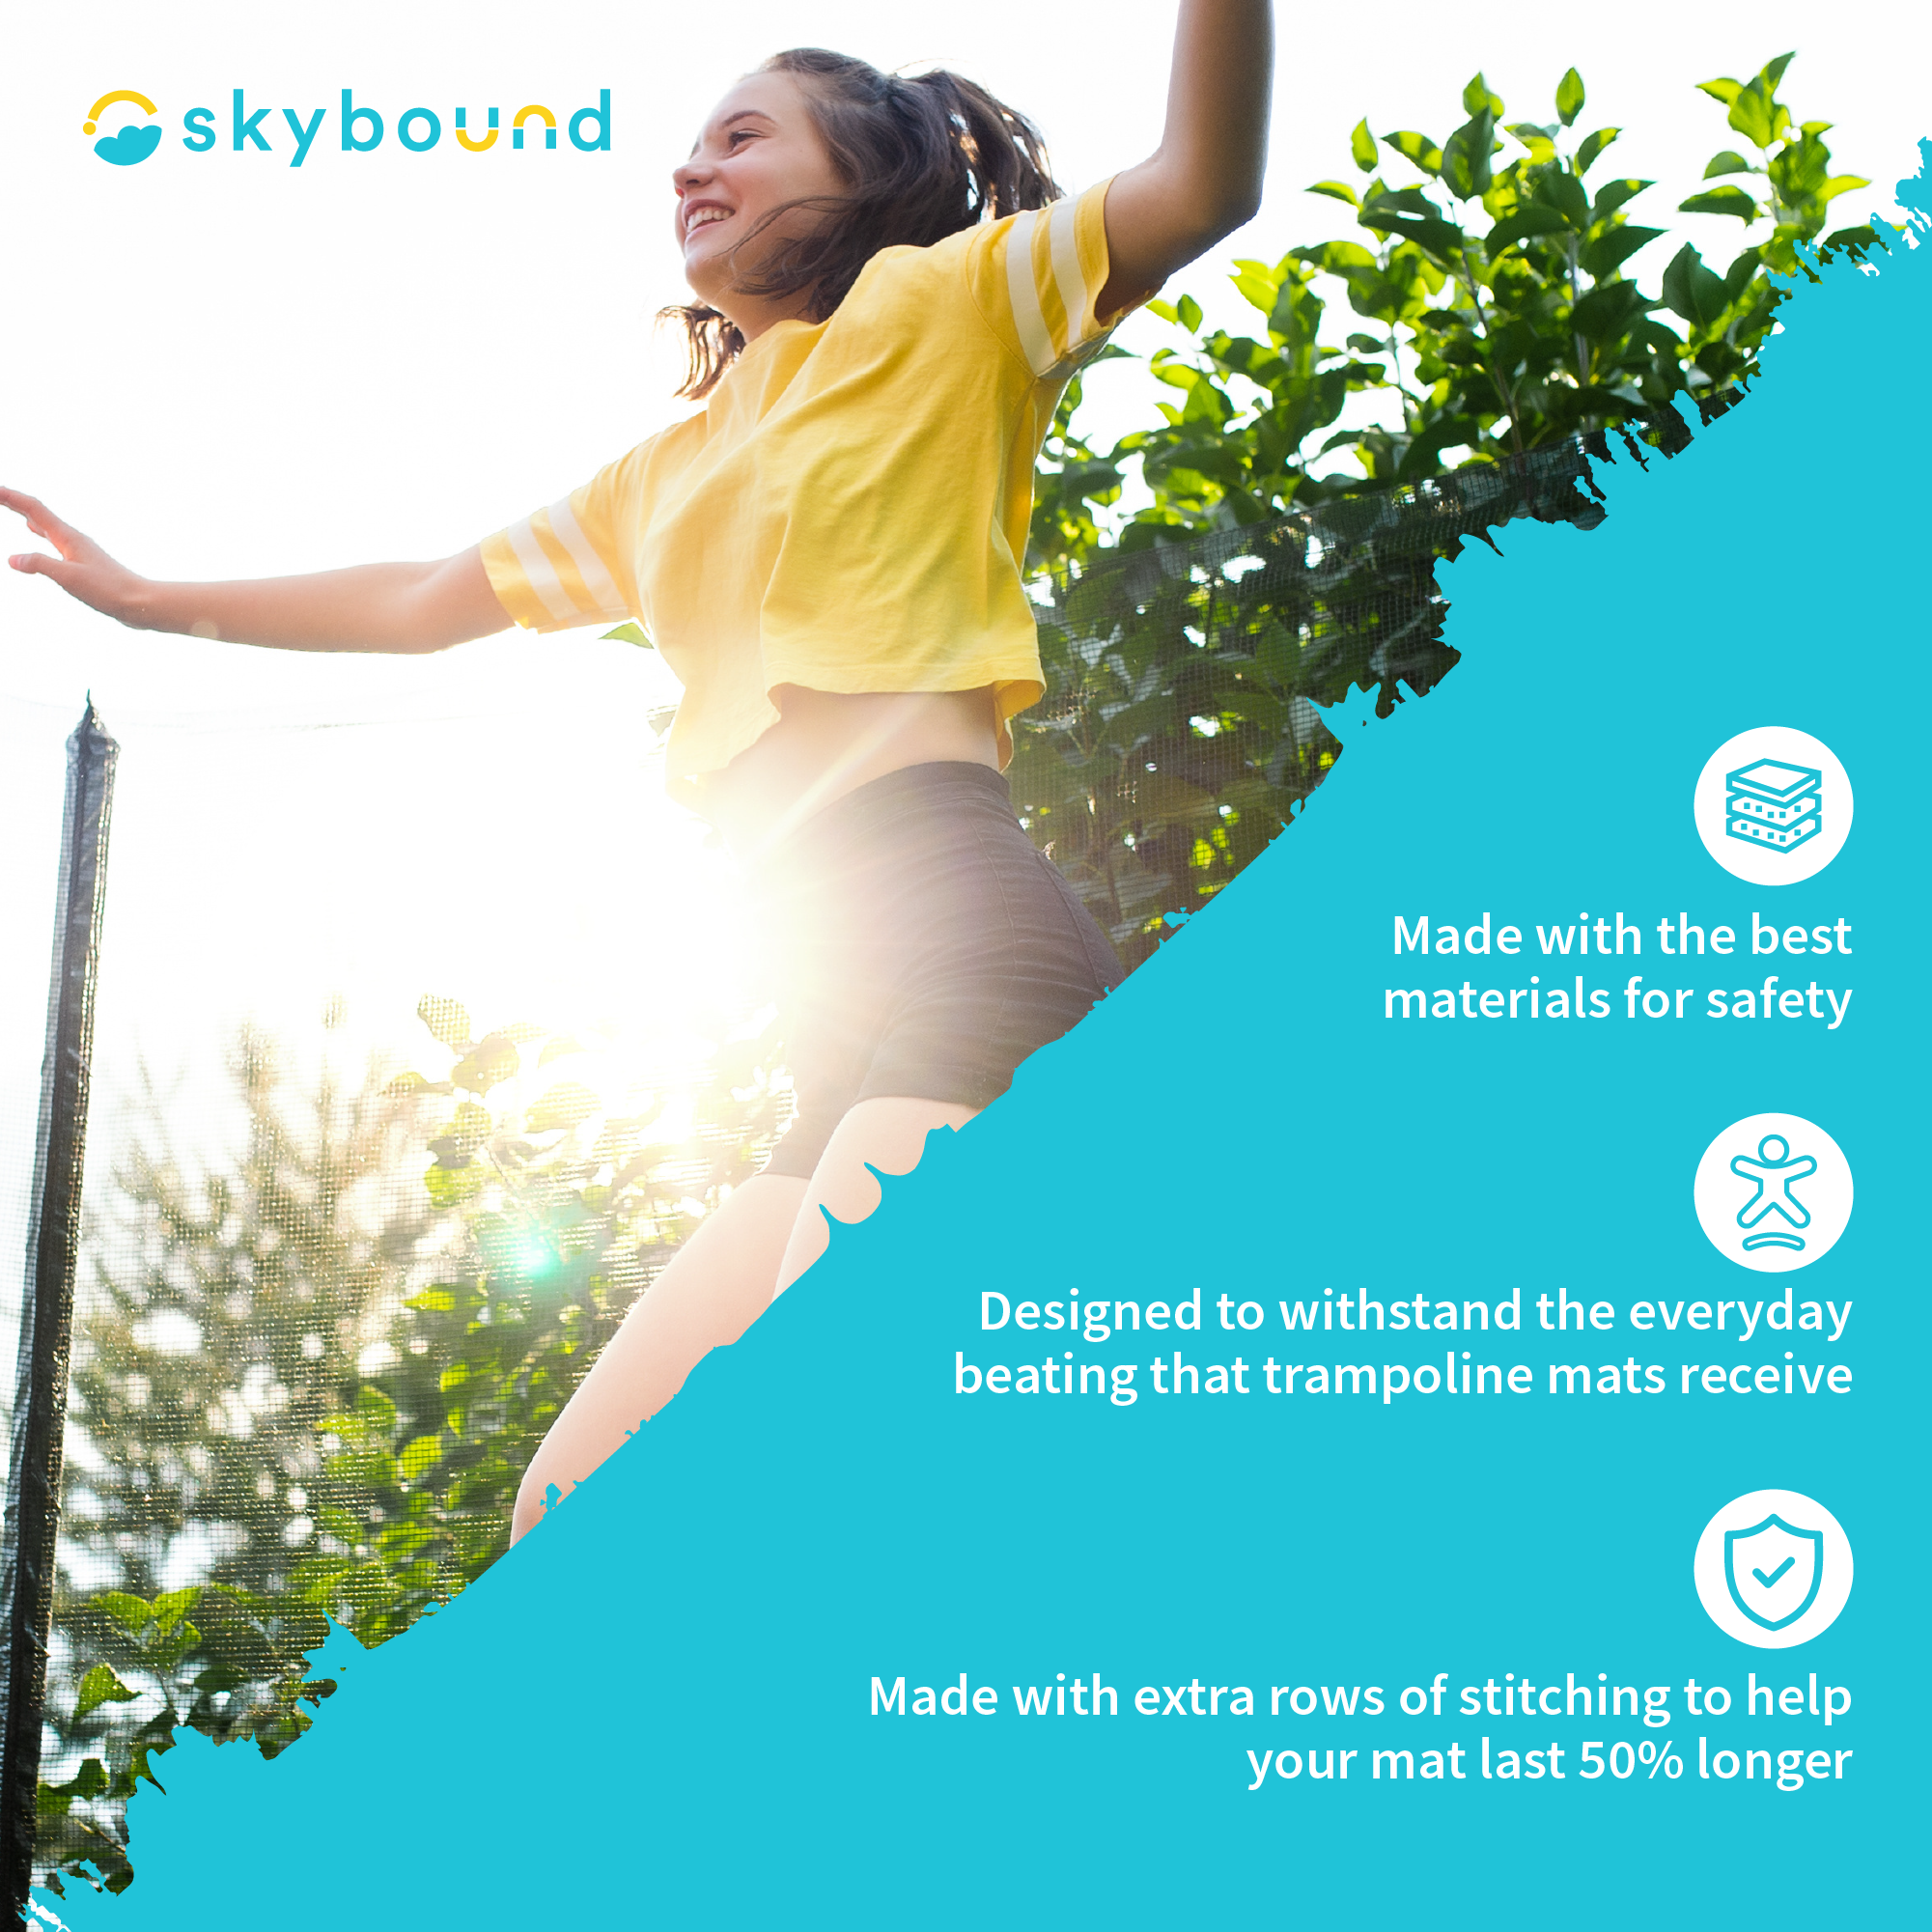 SkyBound: Product is Made with the best materials for safety, Designed to withstand the everyday beating that trampoline mats receive, Made with extra rows of stitching to help your mat last 50% longer.  